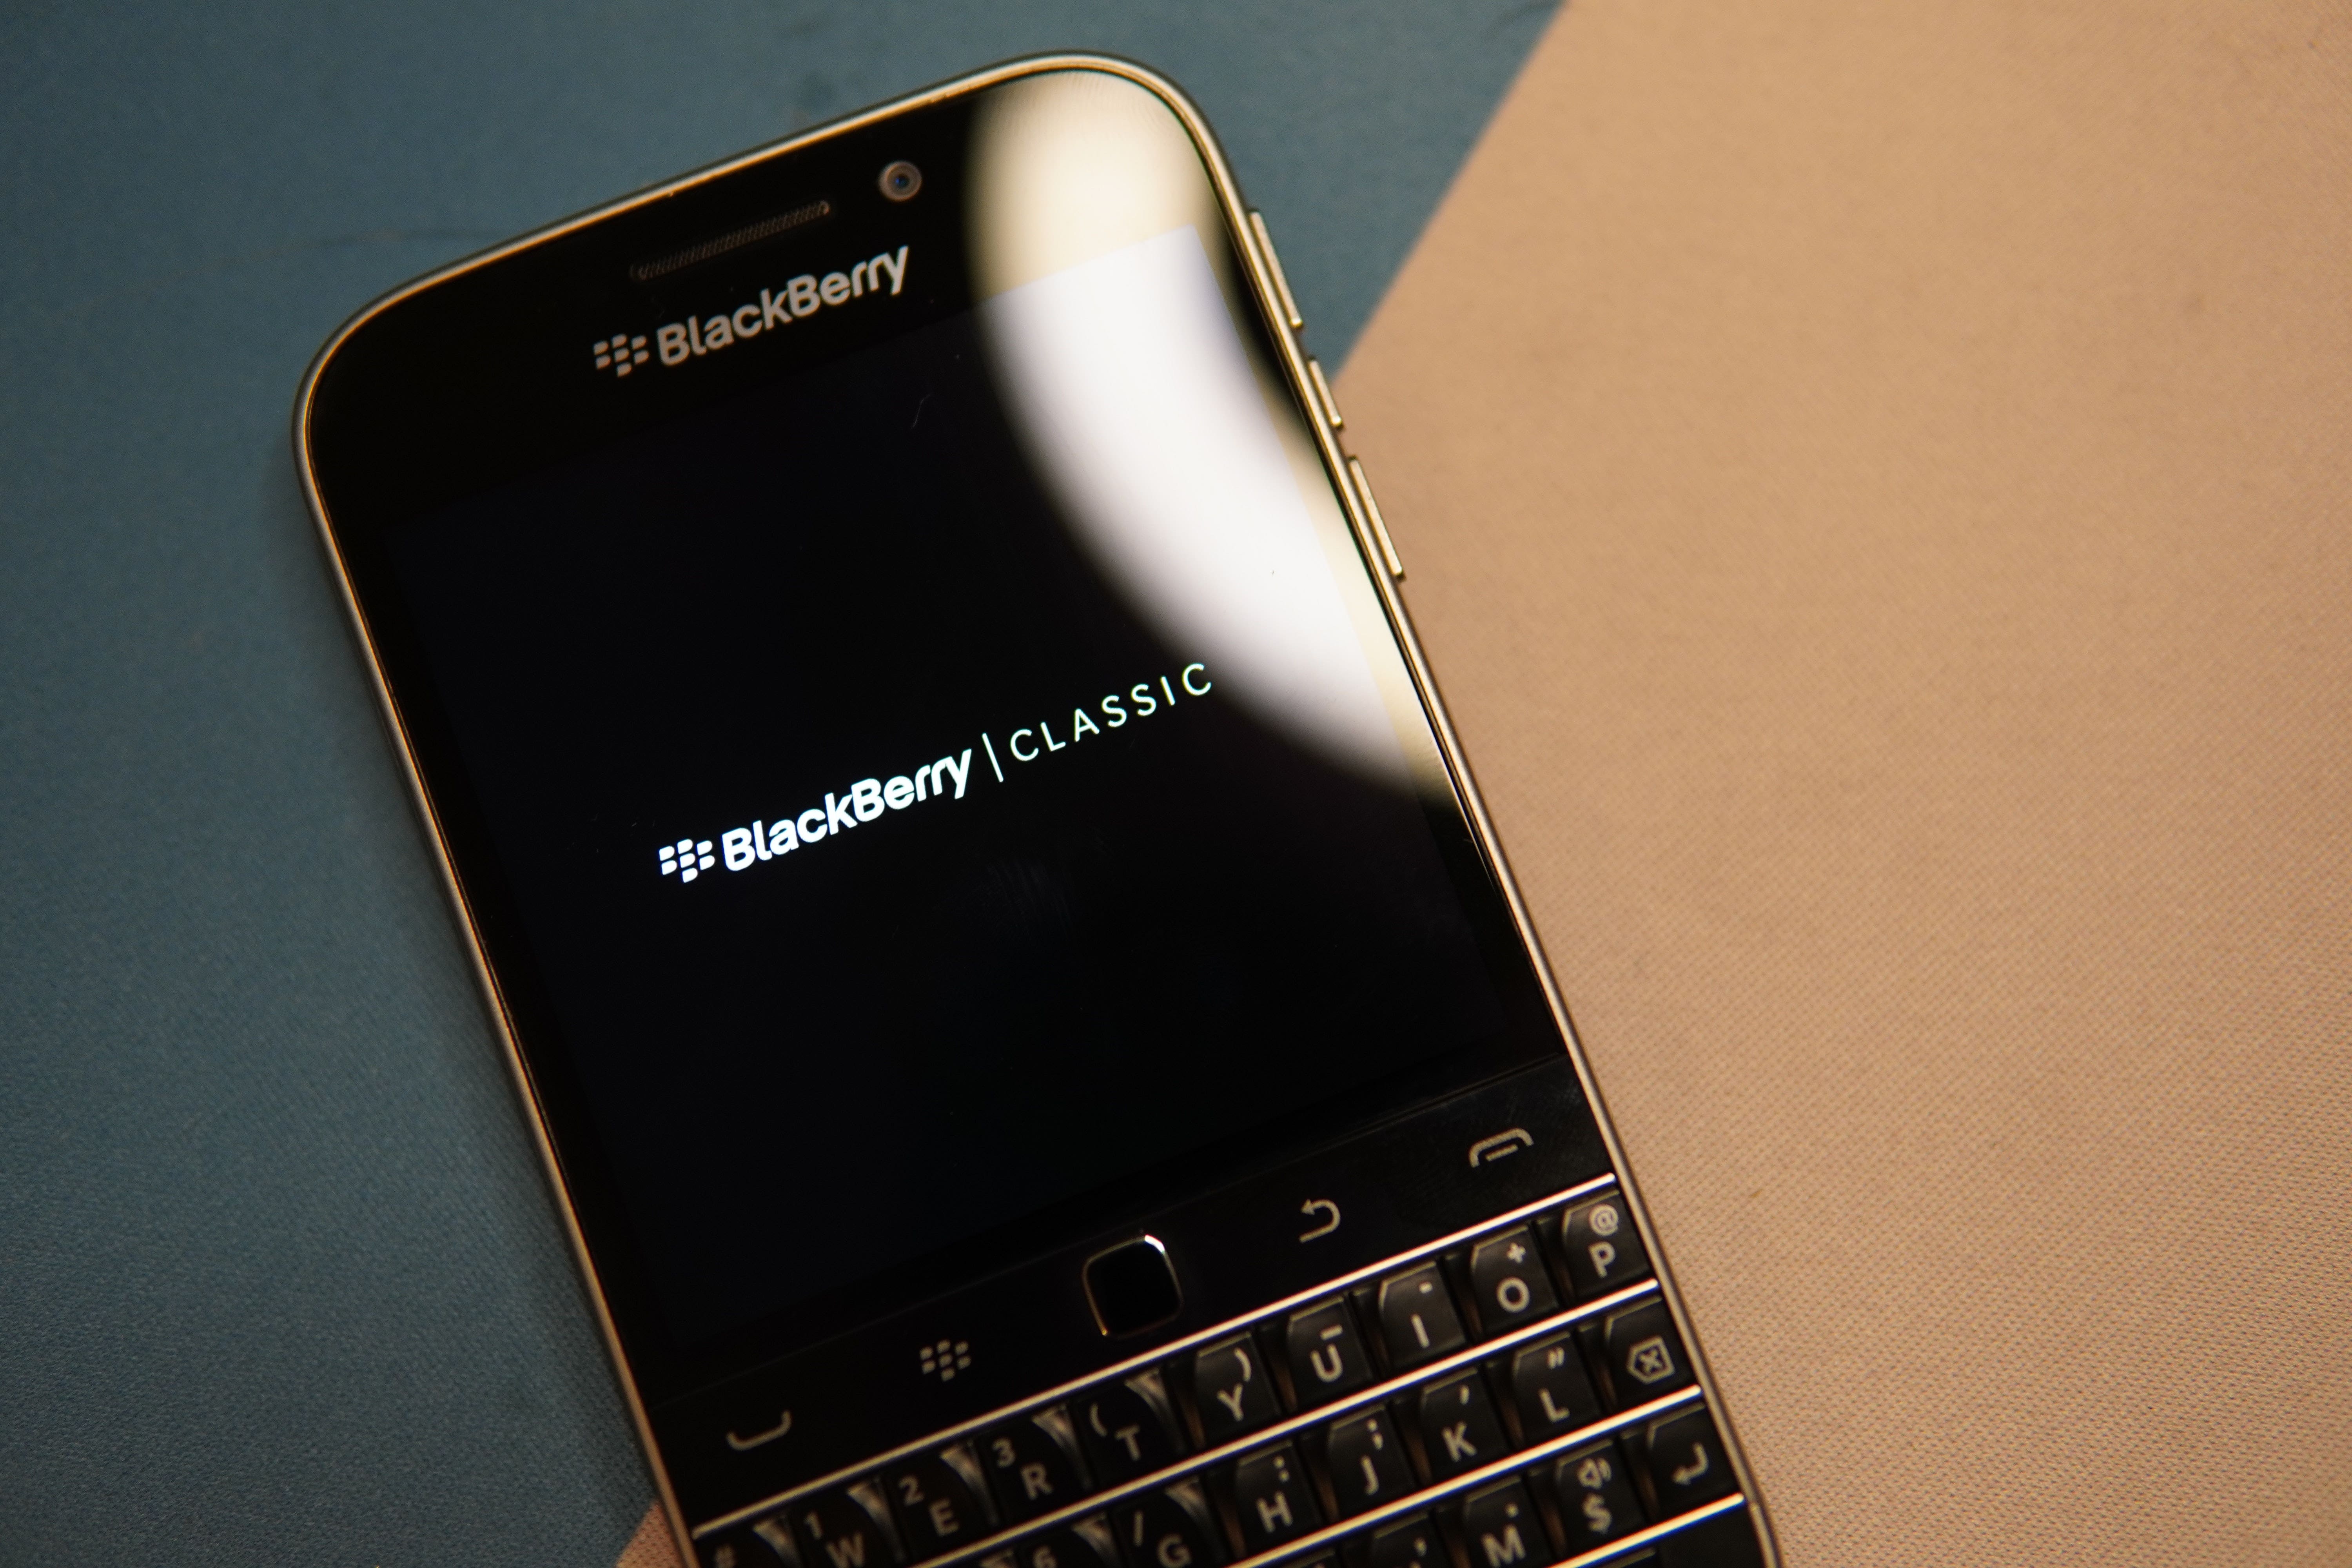 BlackBerry Tells Regulator It Has No Clue Why The Stock Is Surging